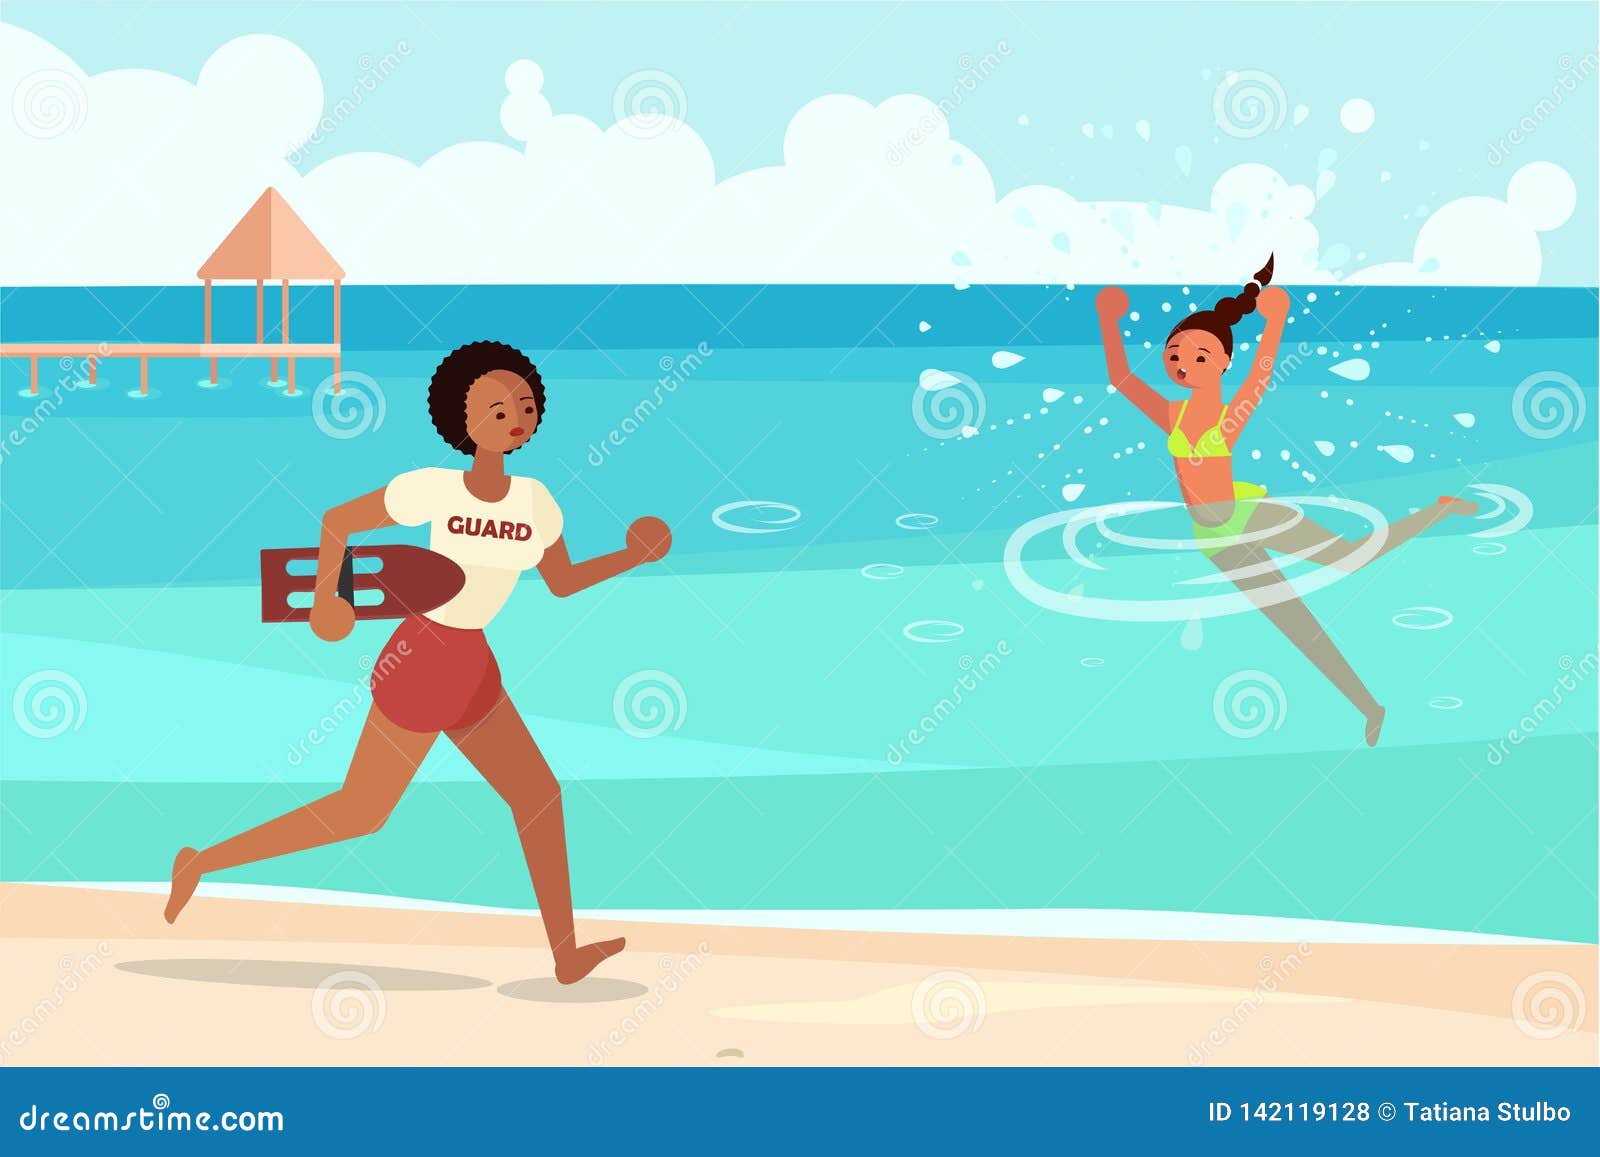 Female Lifeguard Saving a Drowner Stock Vector - Illustration of ...